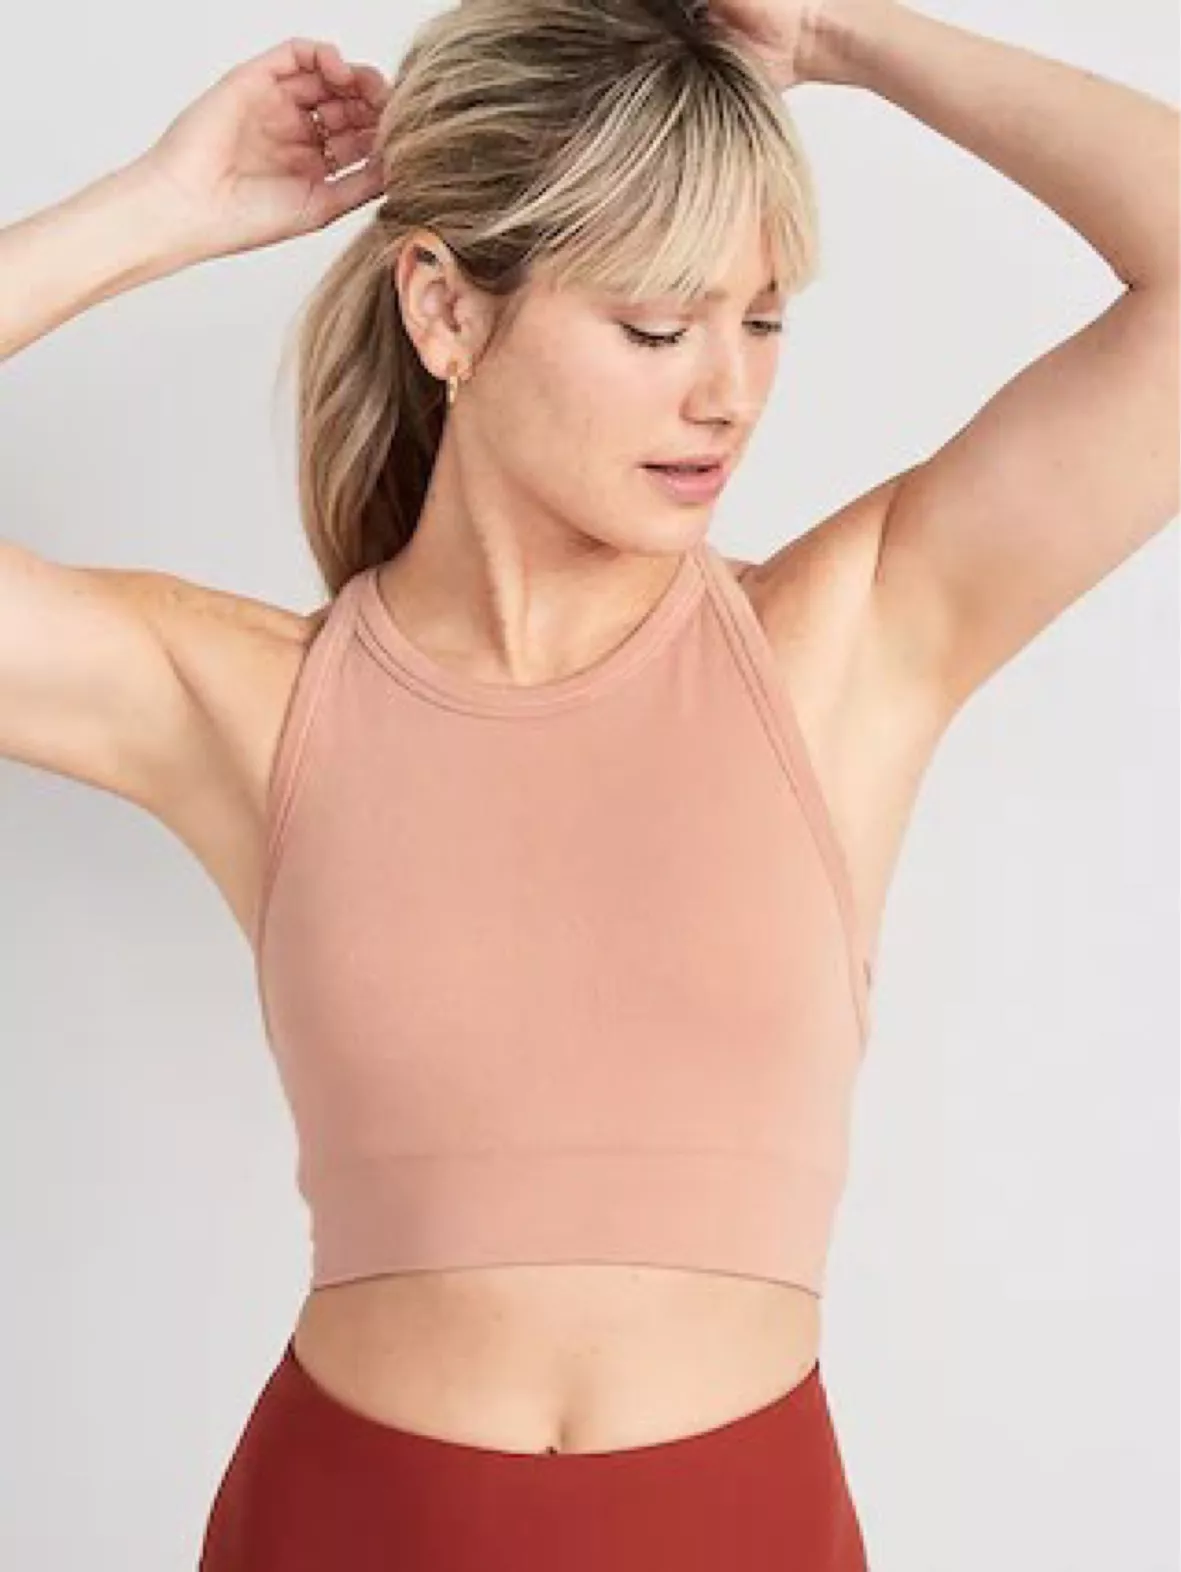 Rib-Knit Seamless Tank Top for Women, Old Navy